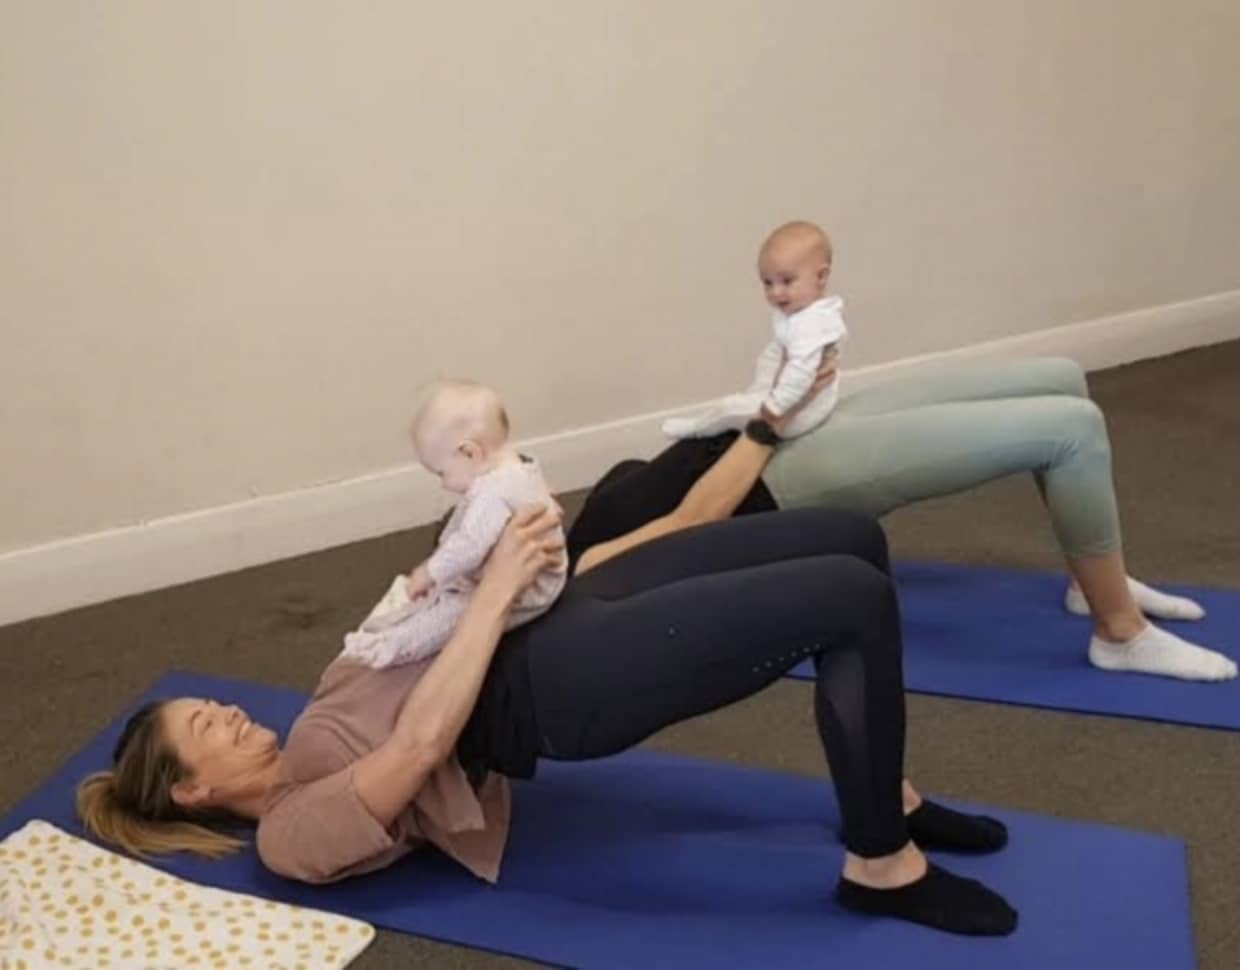 For all you mums out there who have been struggling to leave the house, we will be doing a gentle introductory core stability and stretching session that you can do with your babies in the comfort of your own home.Join us on Monday 24th May at 1:30pm for a free Facebook live Mums and Bubs Pilates session.Head to our Facebook page now to view the live event.